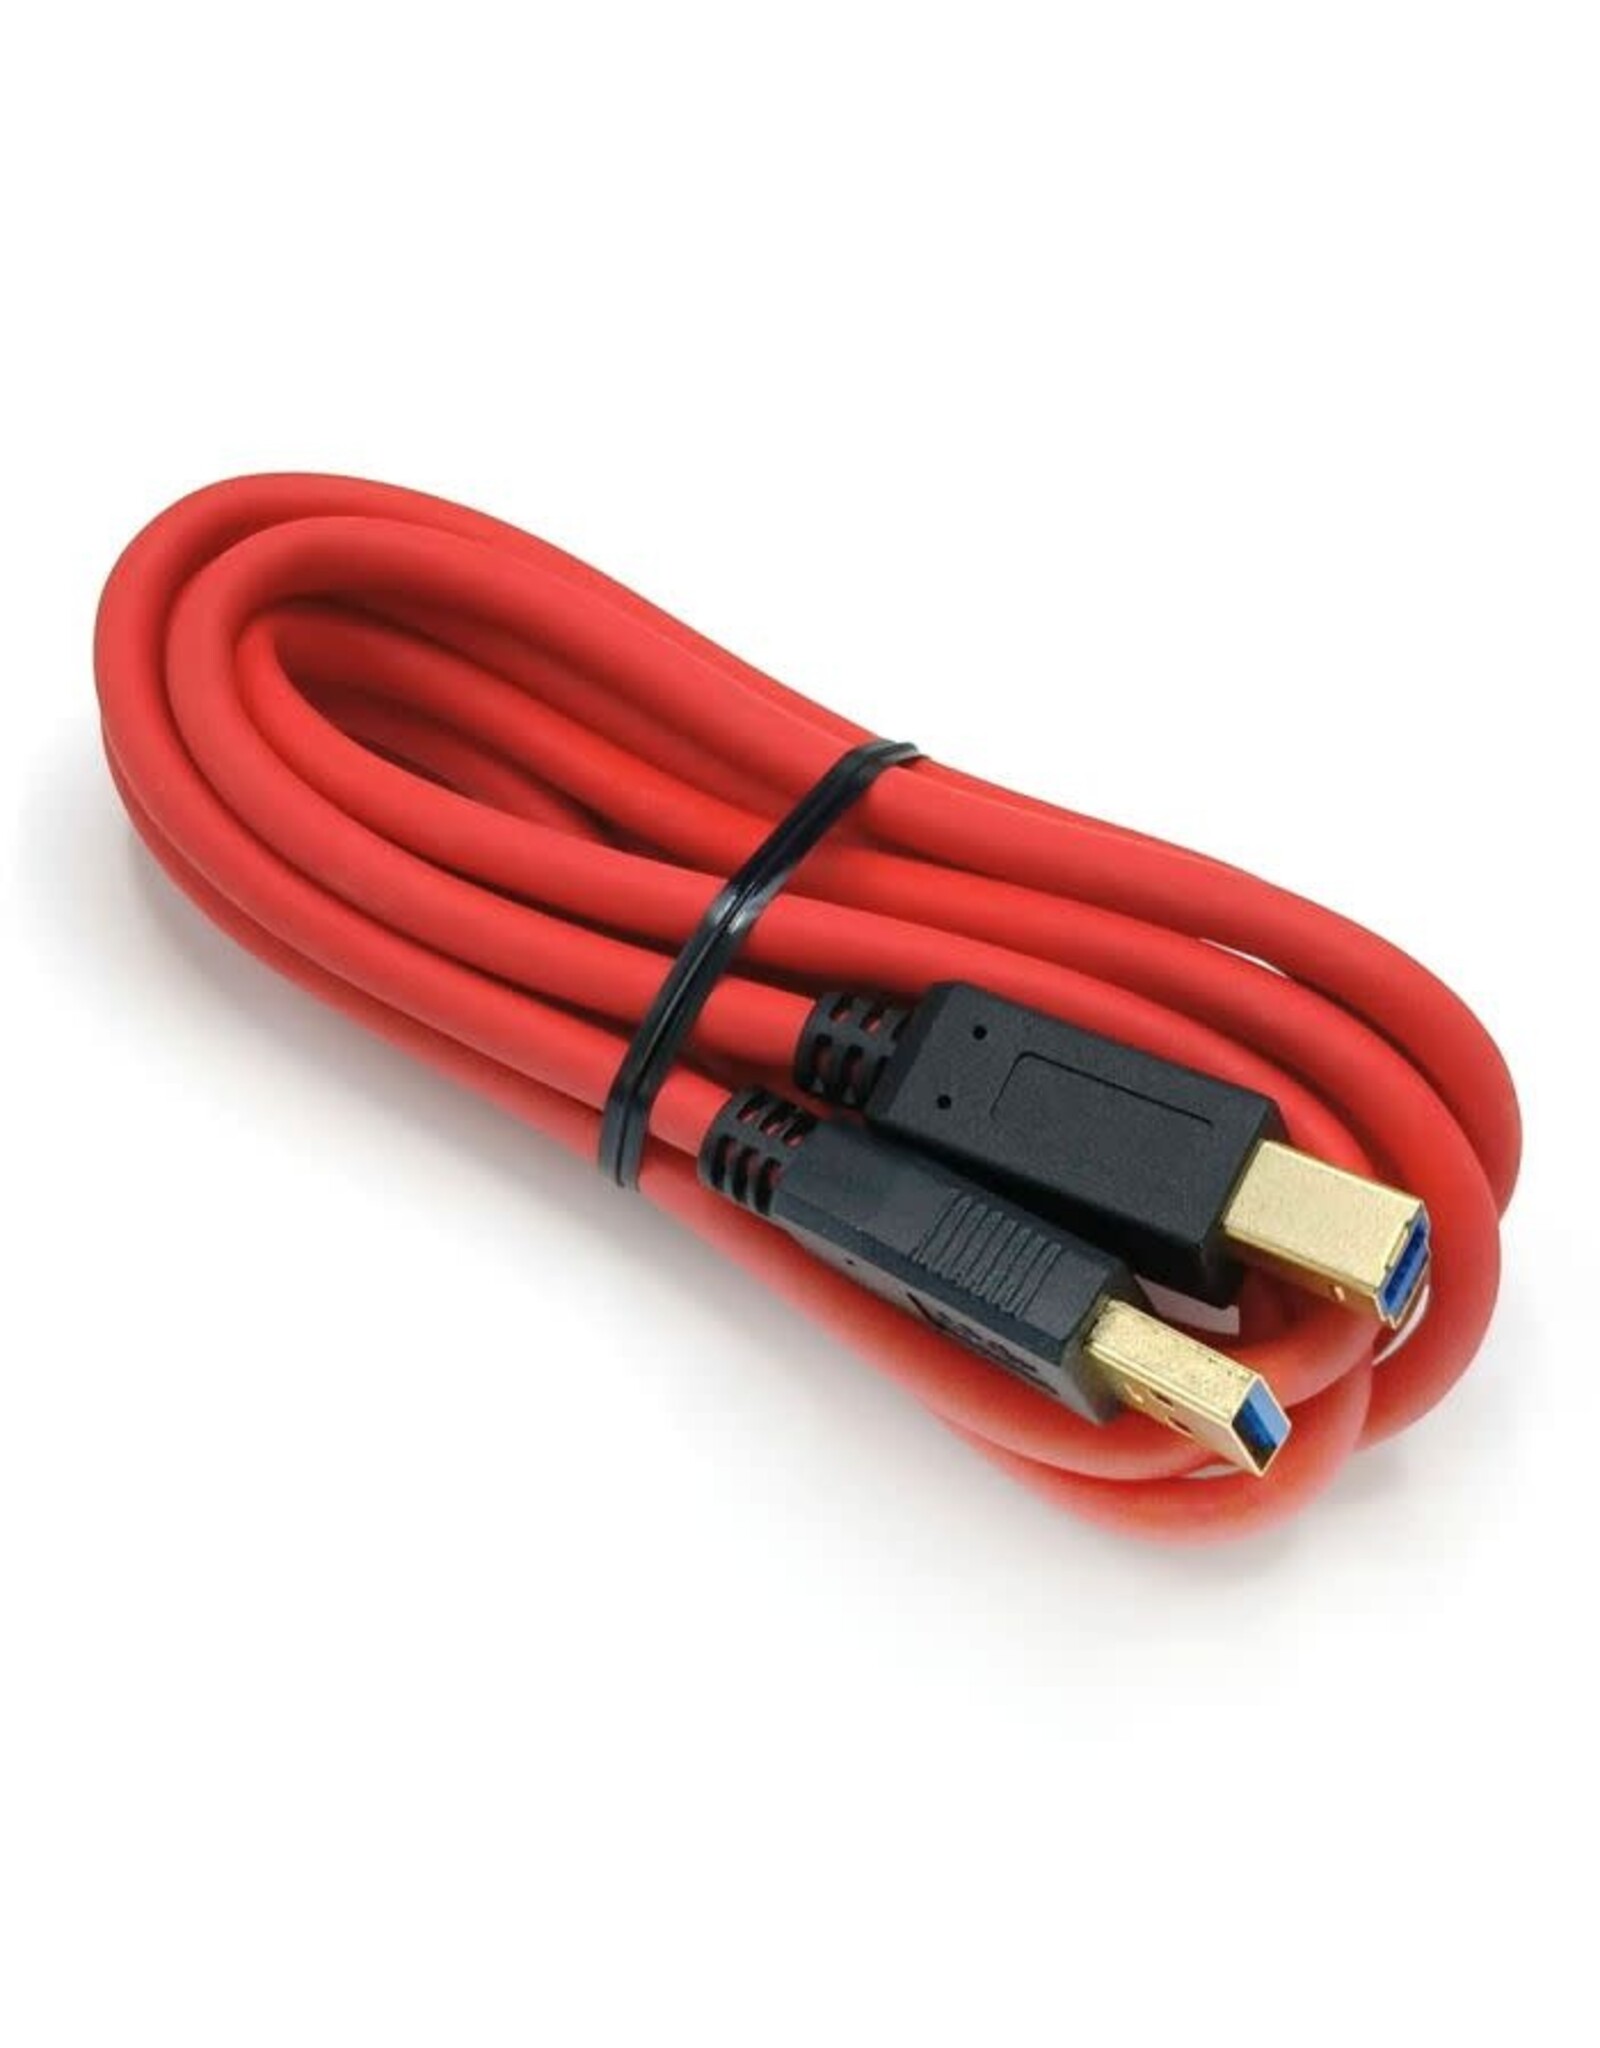 ZWO ZWO USB3.0 Type-B Cable